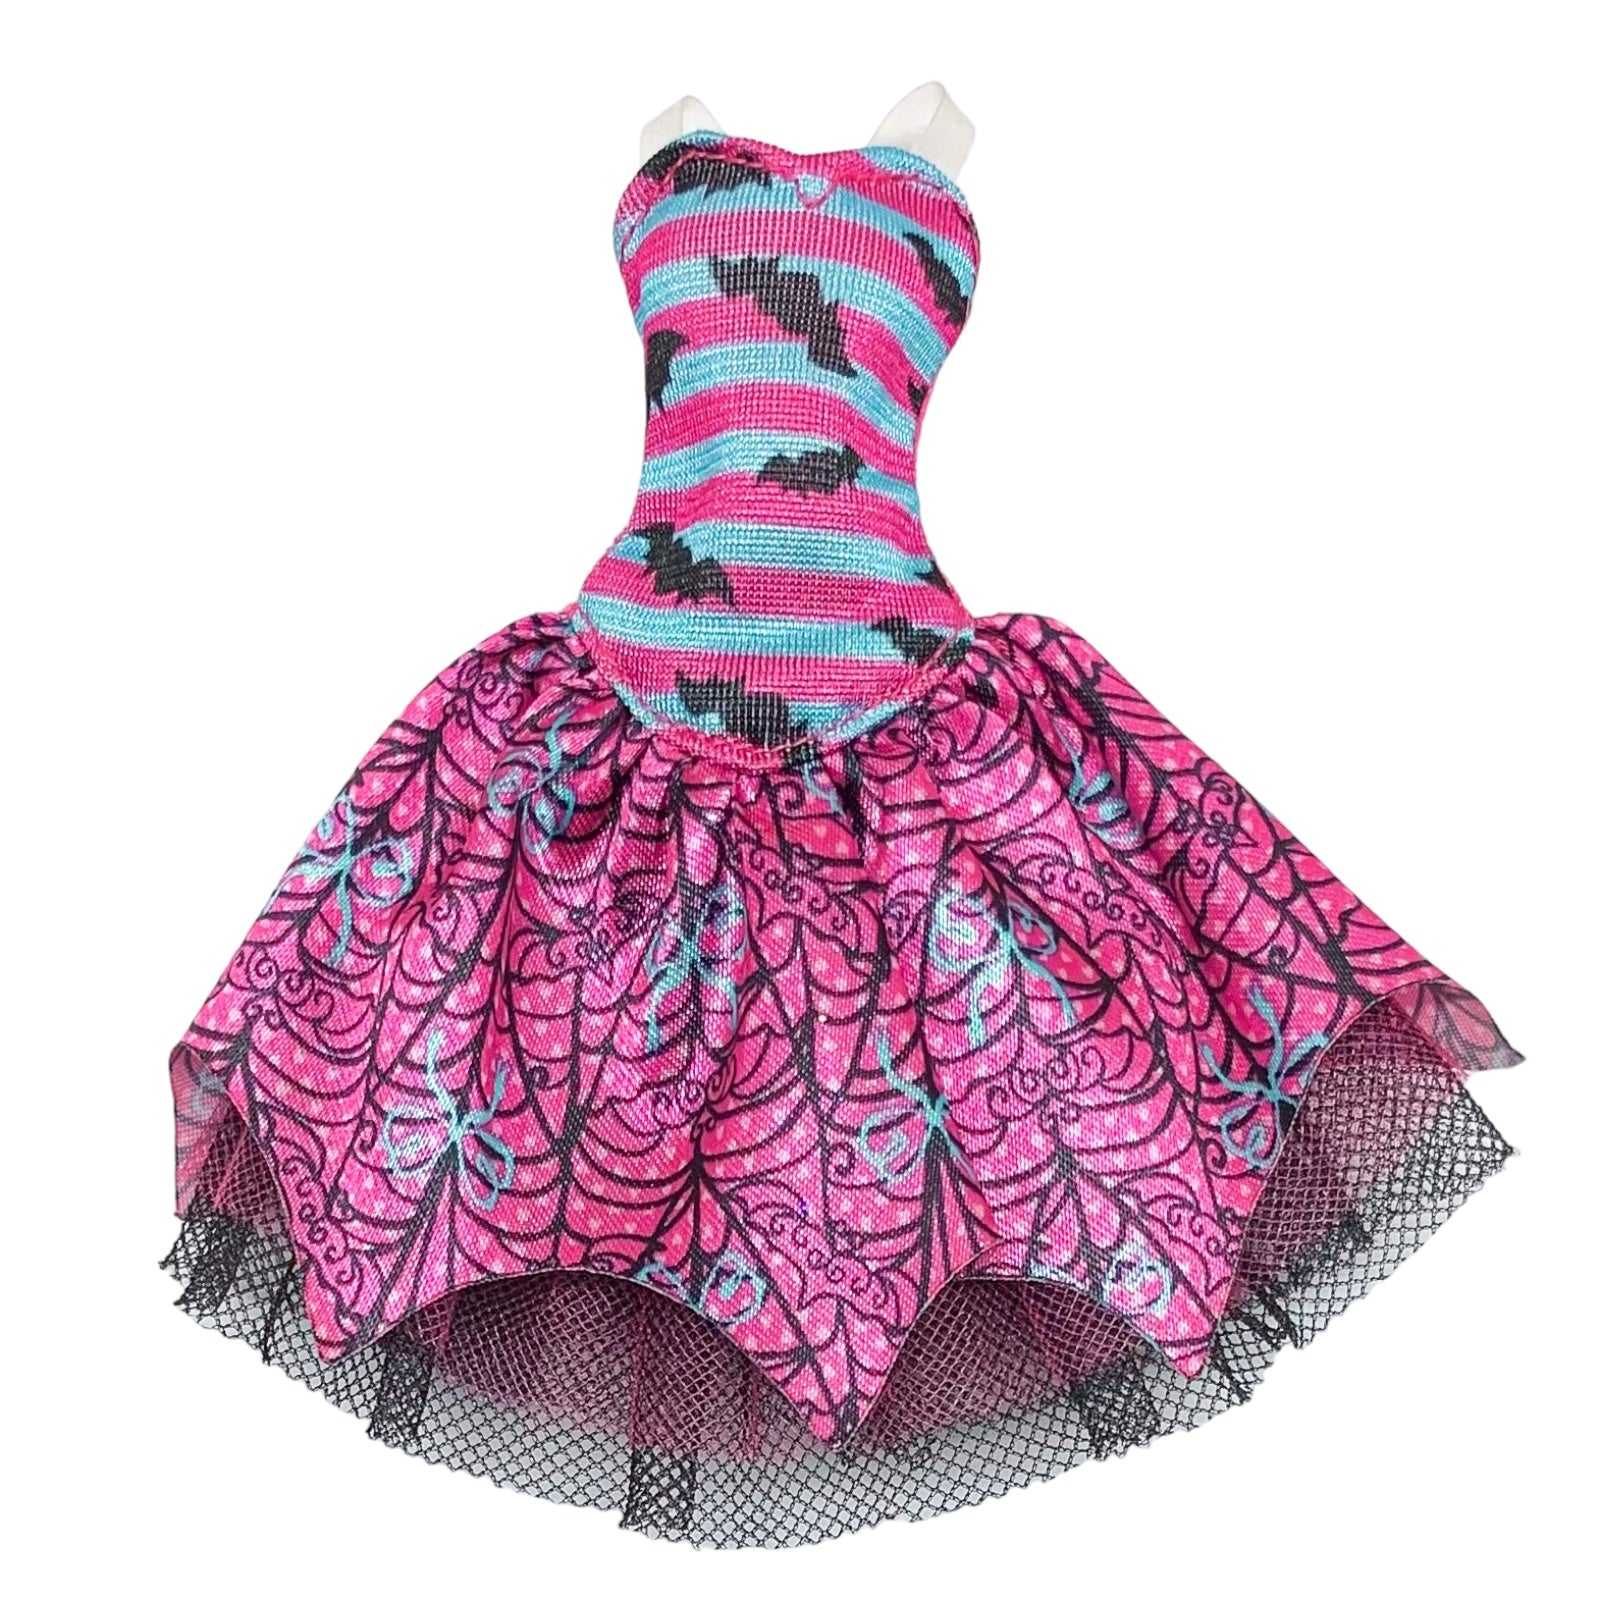 Monster High Ballerina Ghouls Draculaura Doll Outfit Replacement